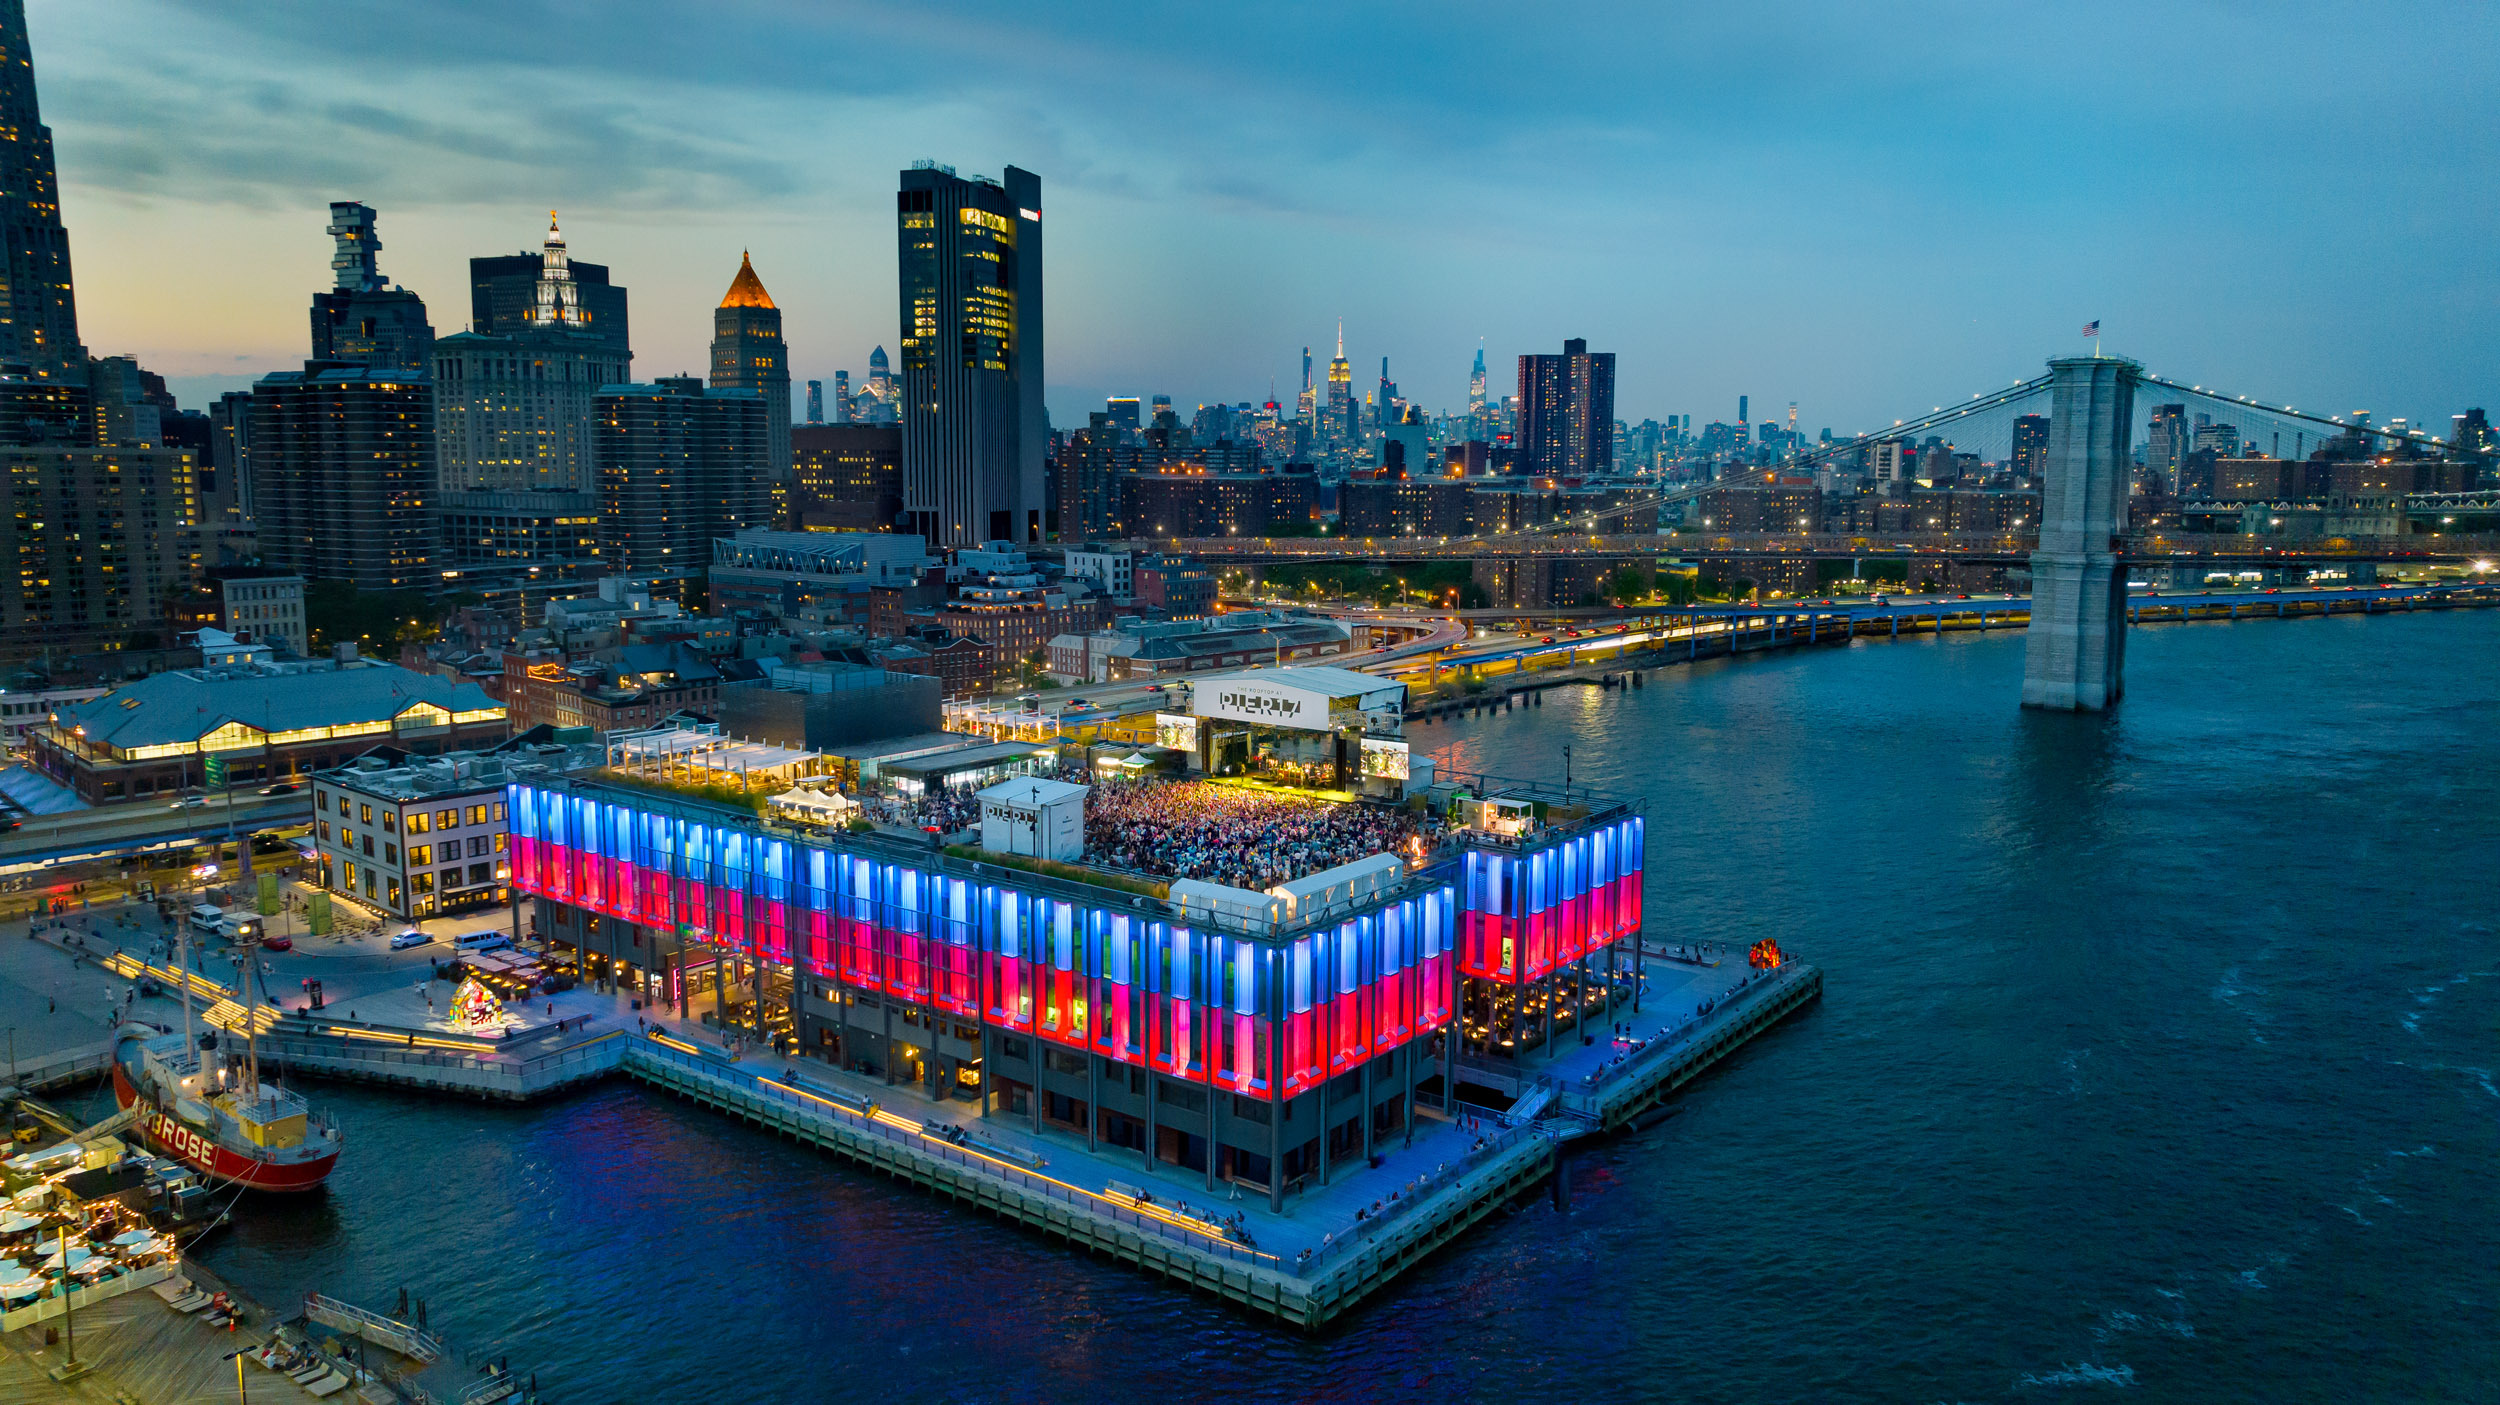 60+ concerts are coming to The Rooftop at Pier 17 this summer